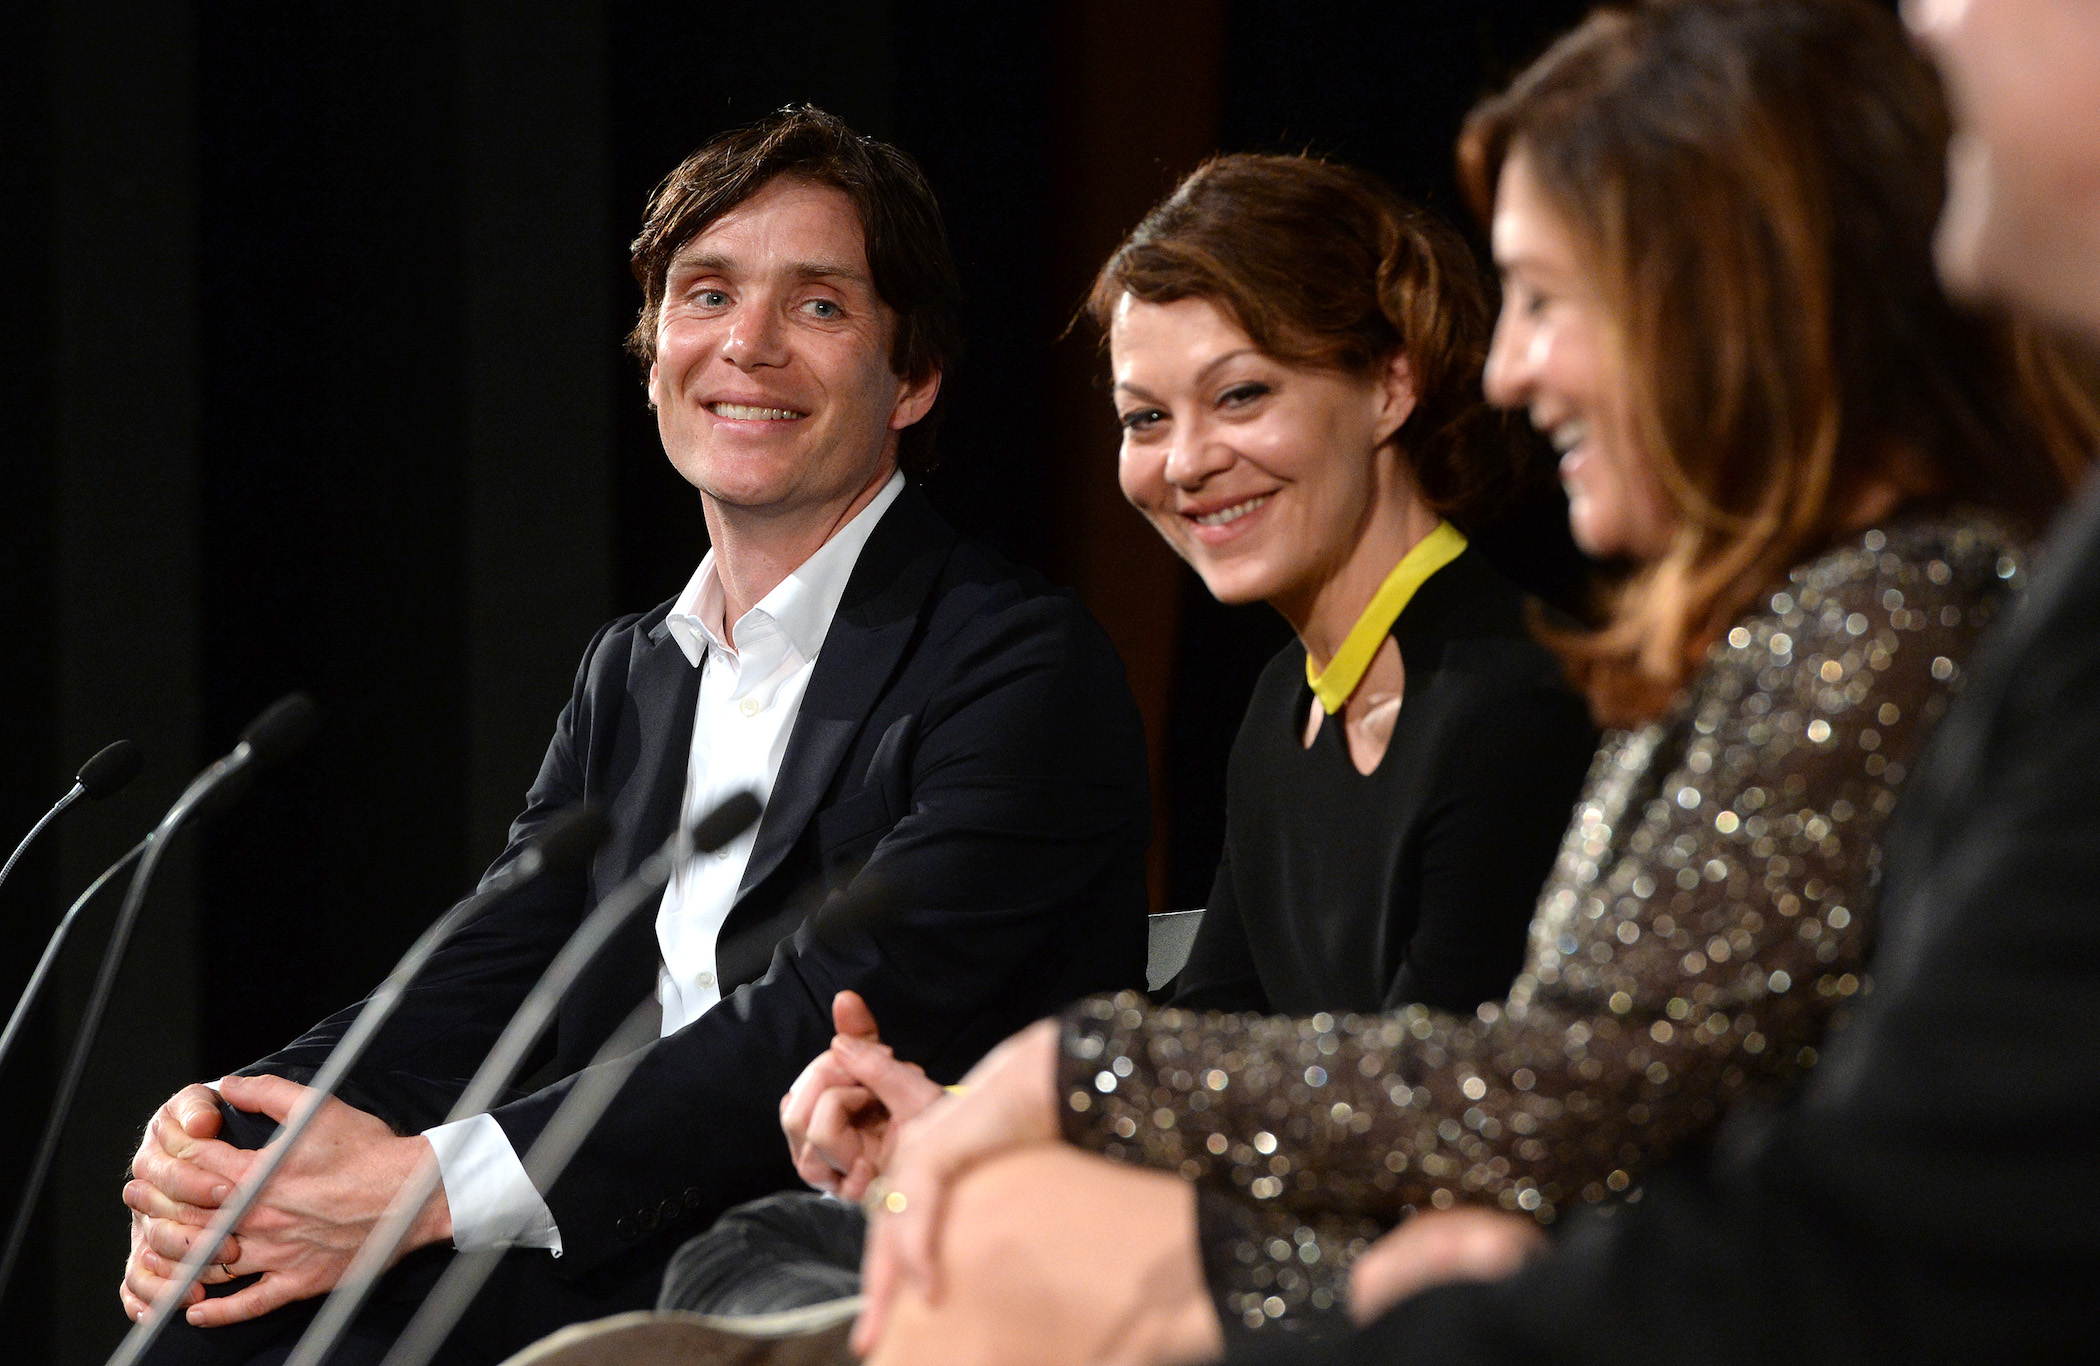 Cillian Murphy, the star of 'Peaky Blinders' Season 6, with Helen McCrory during a Q&A at the Premiere 'Peaky Blinders' Season 3